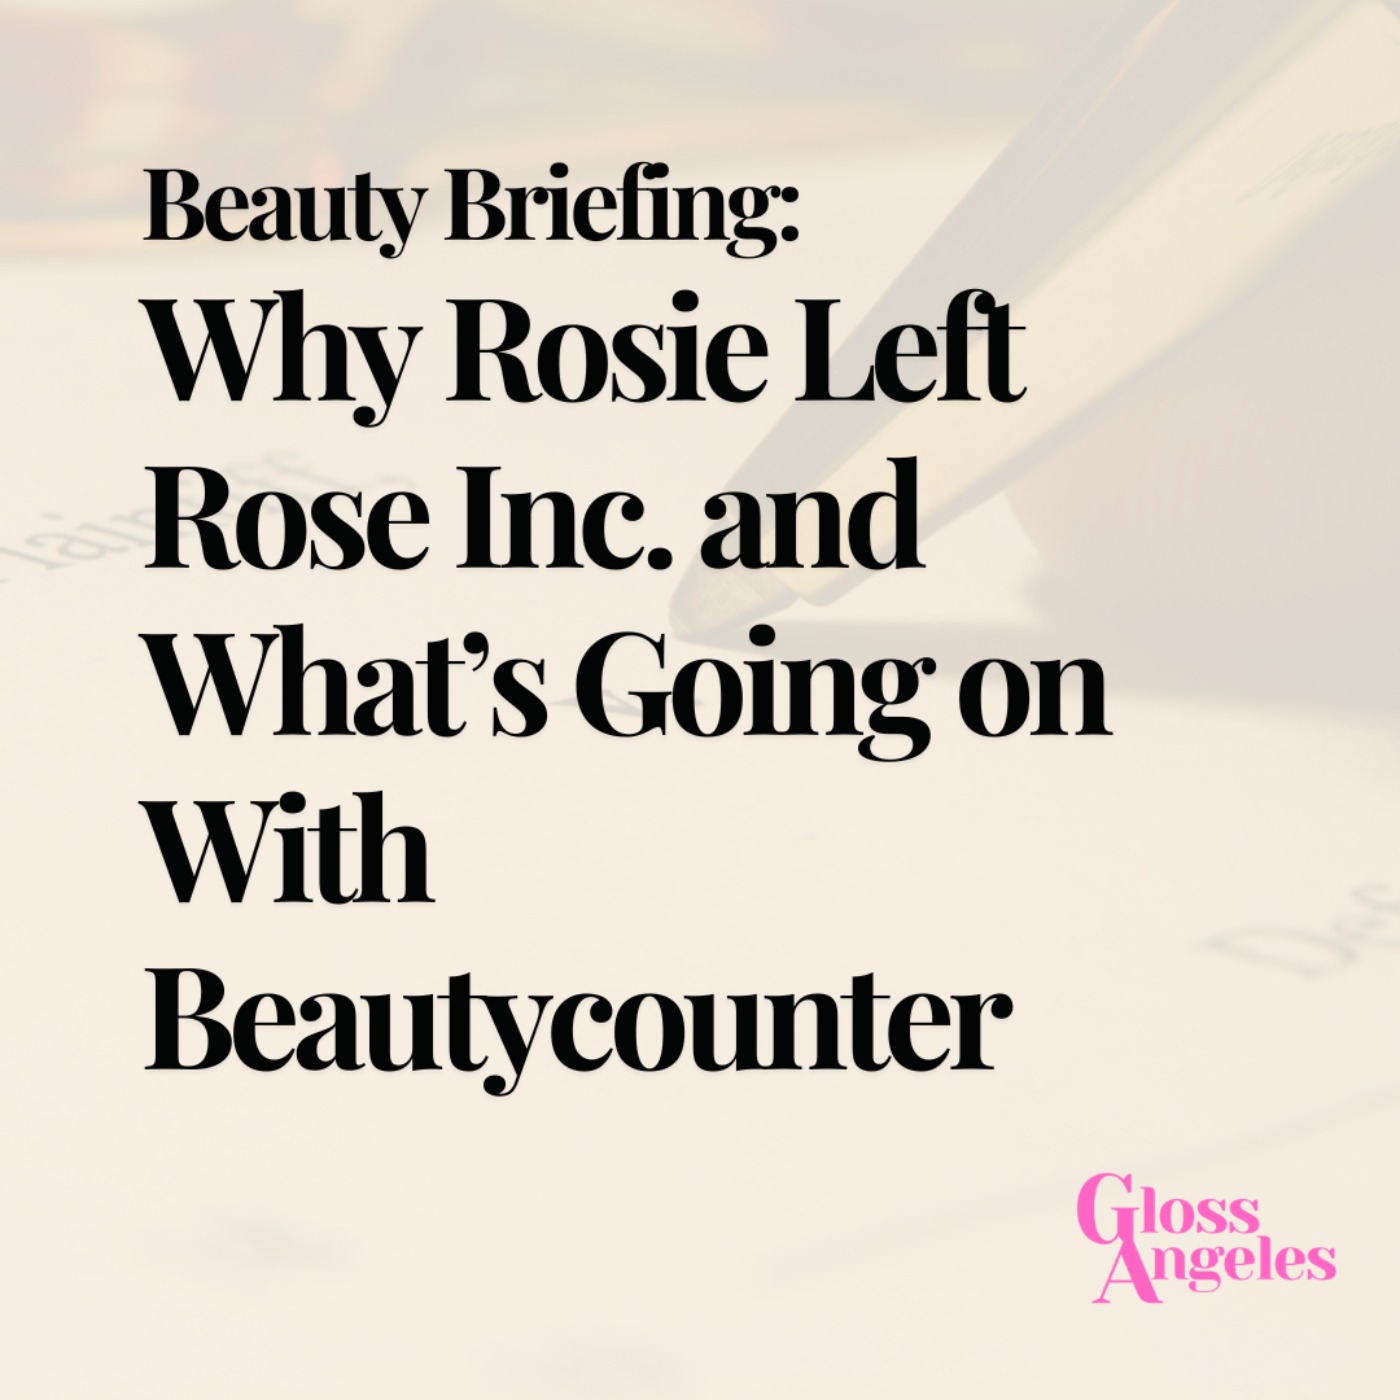 Beauty Briefing: Why Rosie Left Rose Inc. and What’s Going on With Beautycounter